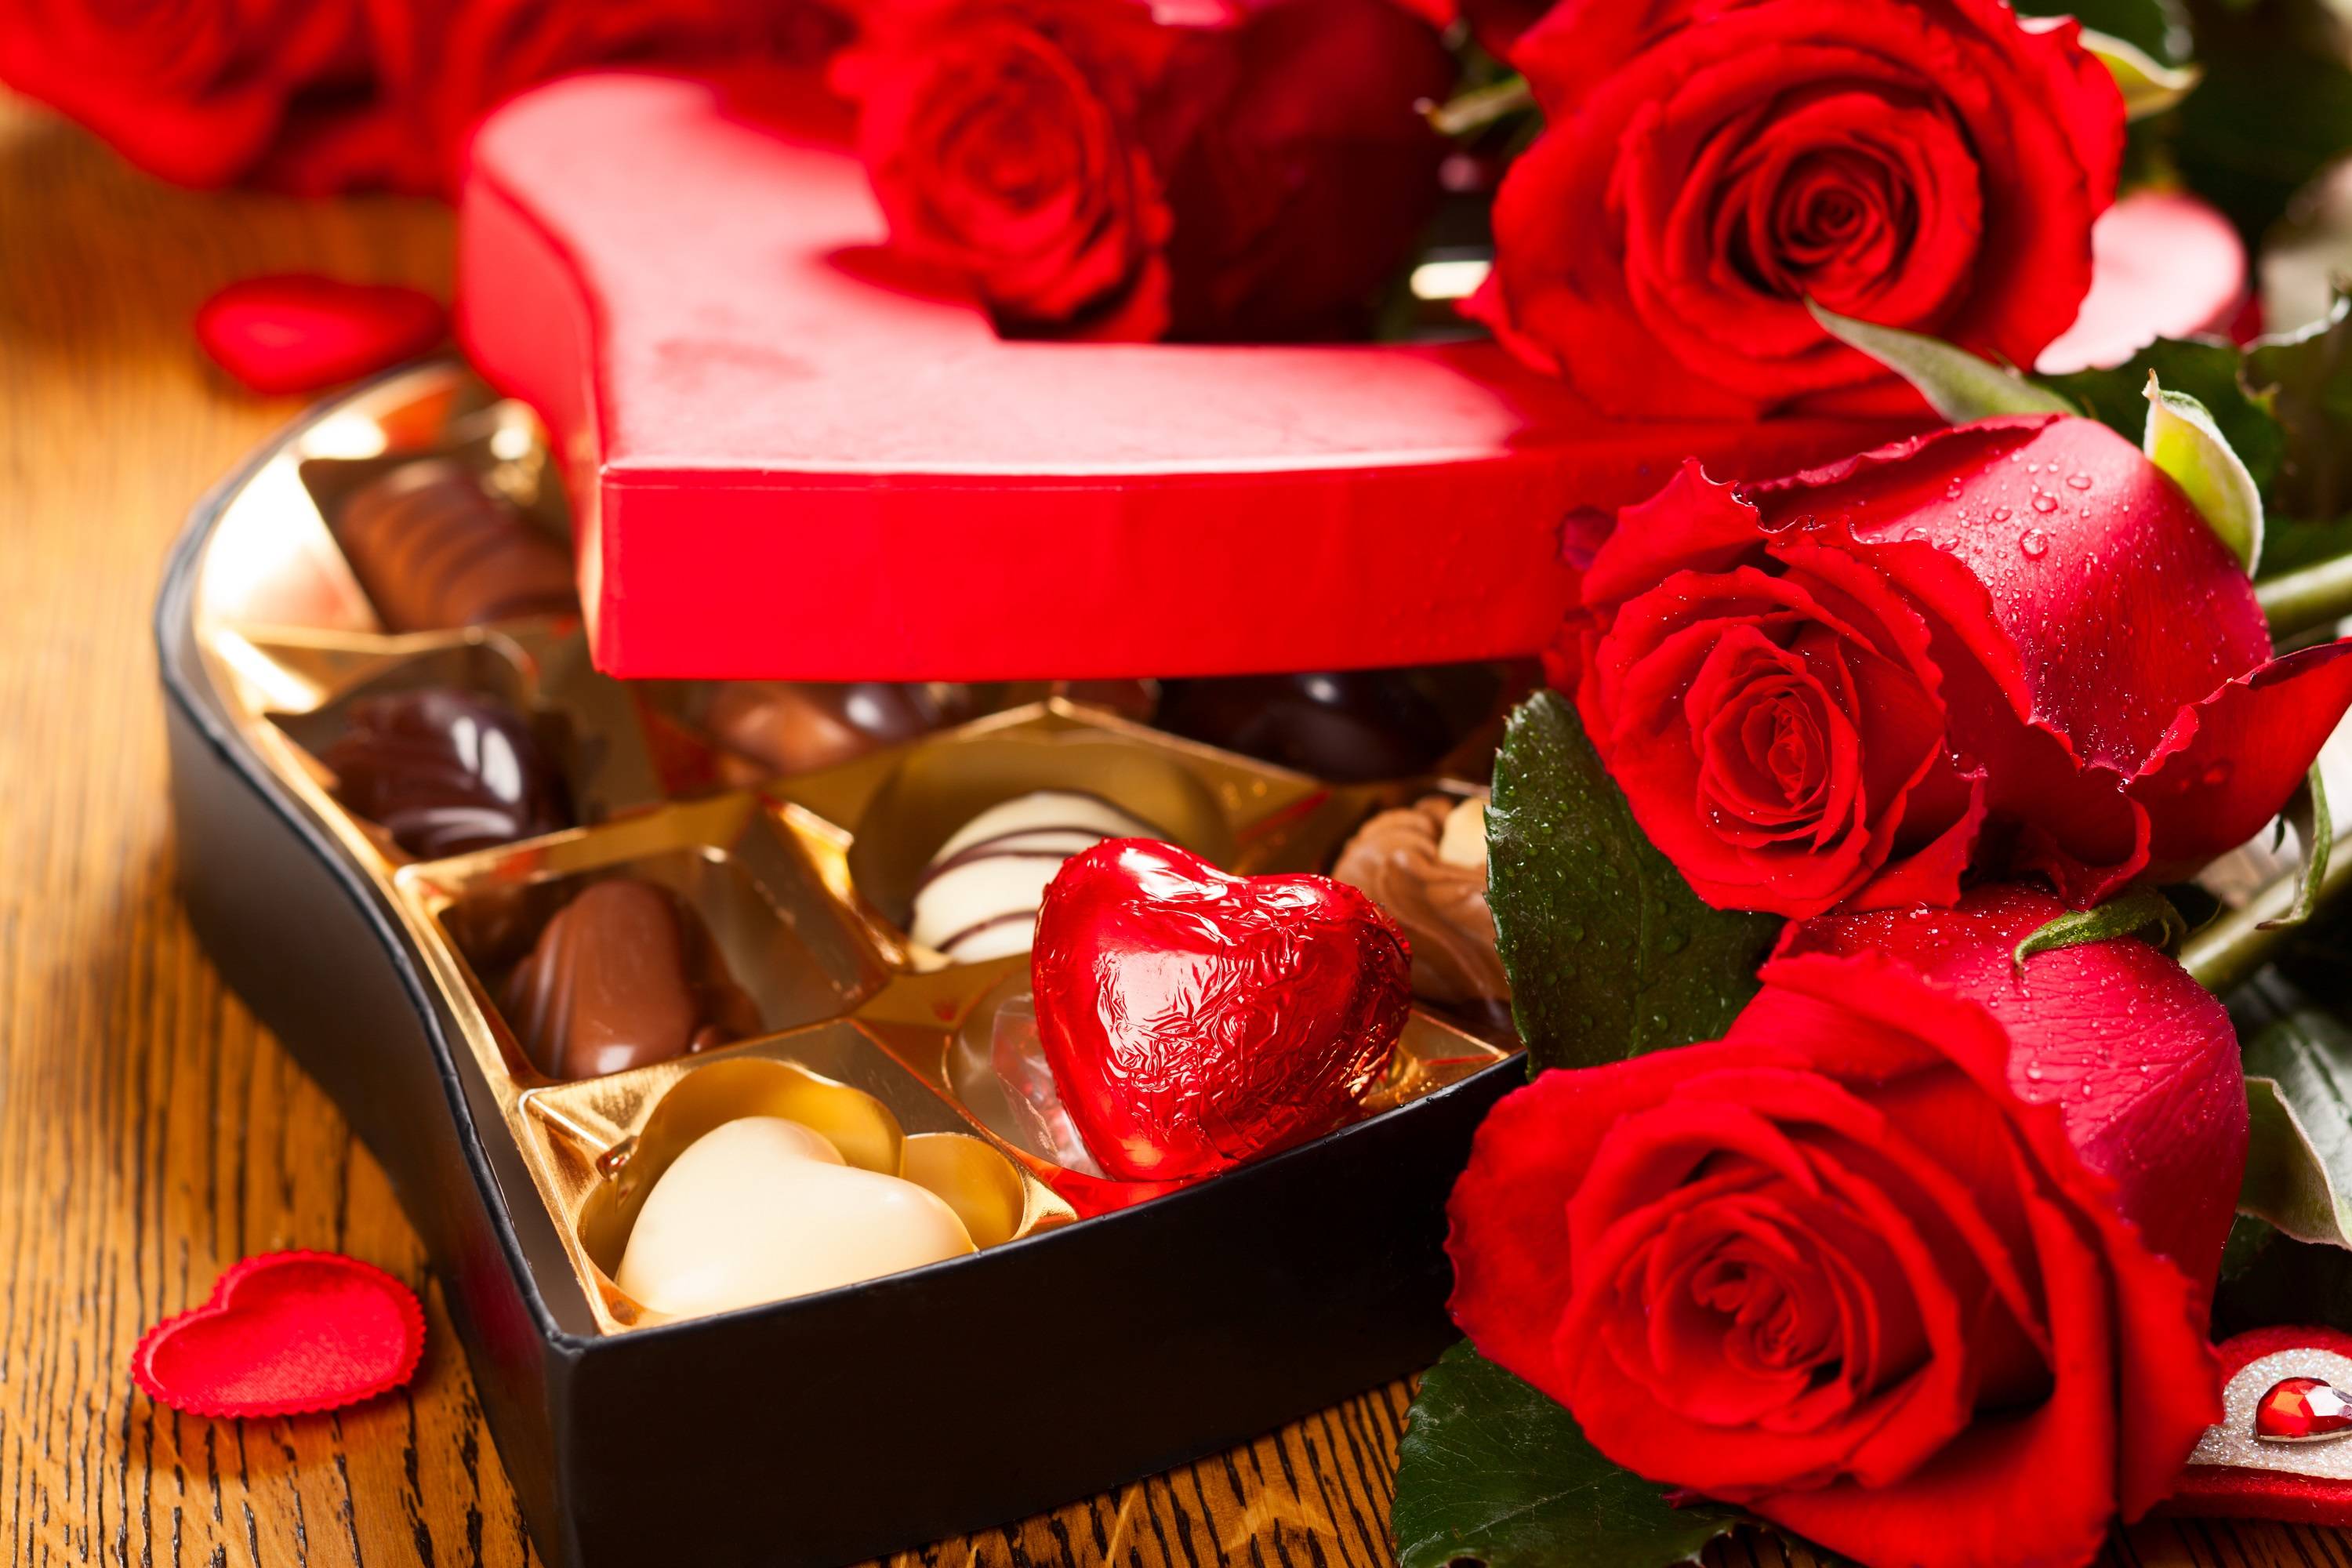 Red roses and chocolates for Valentines day